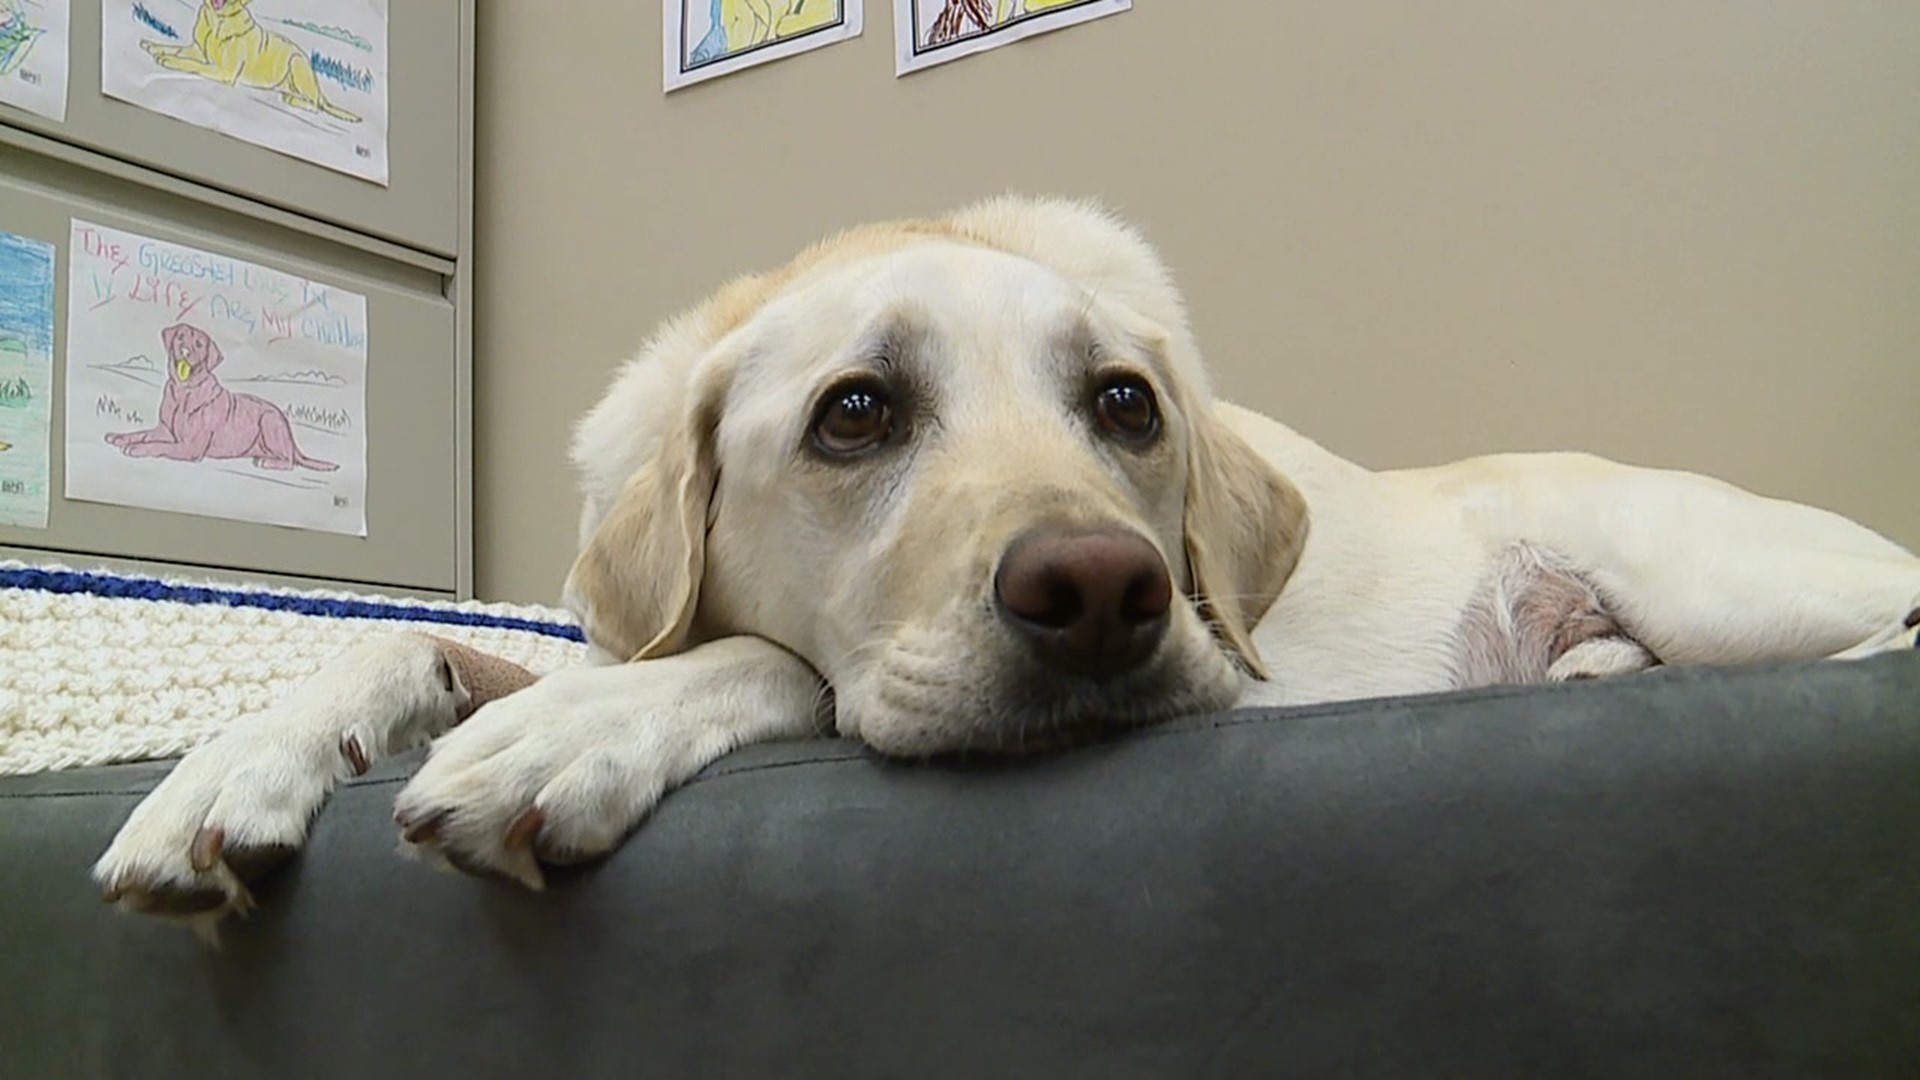 Jedi, a facility dog at the Lycoming County Courthouse, has been undergoing chemotherapy for lymphoma.